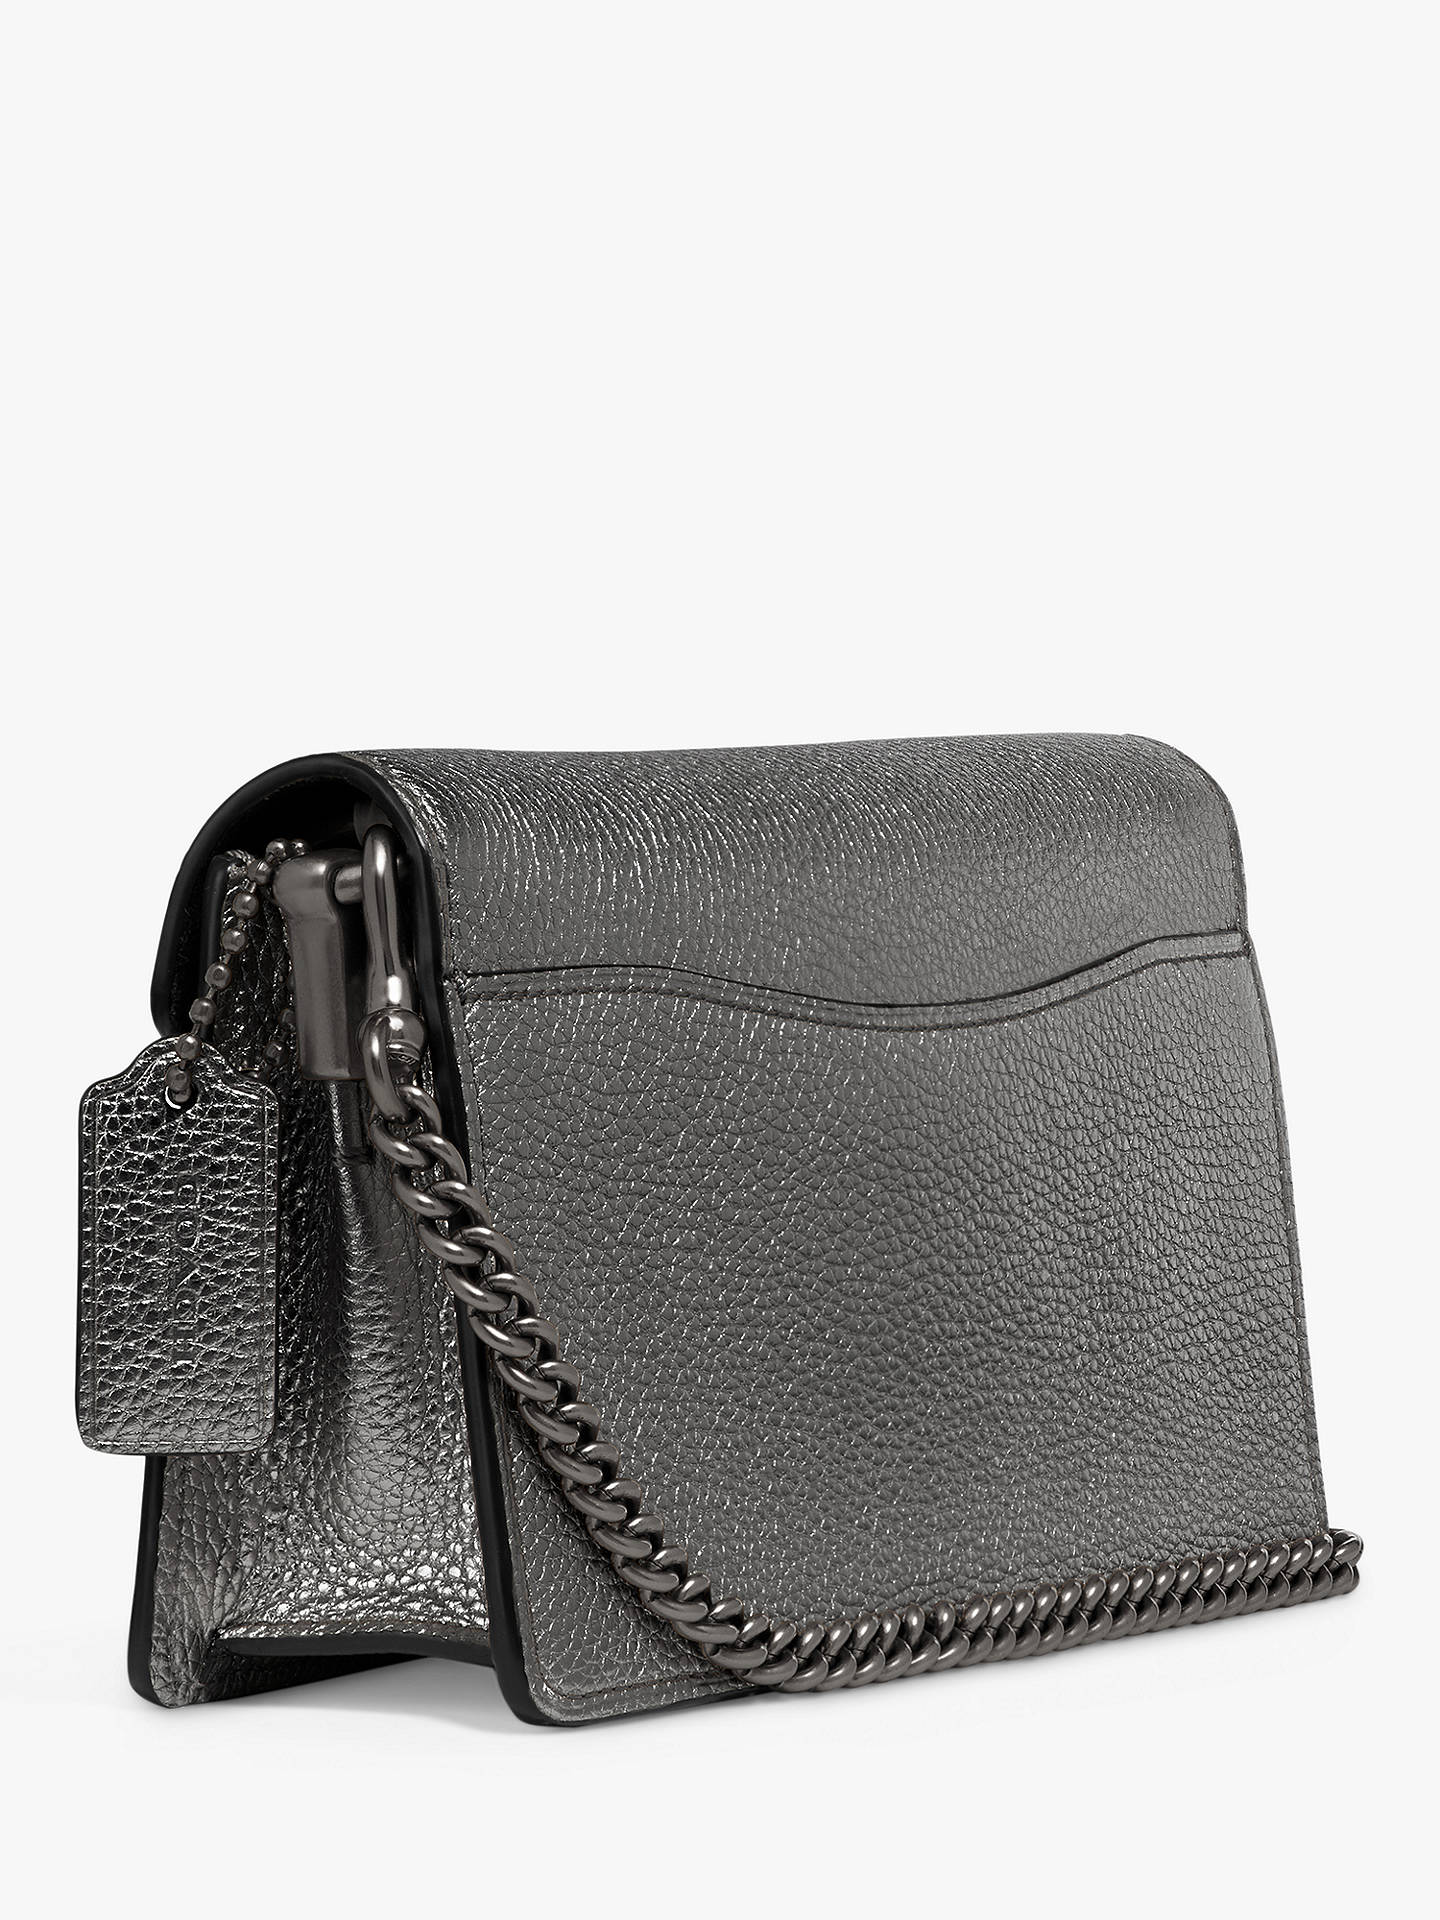 Coach Tabby Leather Chain Cross Body Bag at John Lewis & Partners